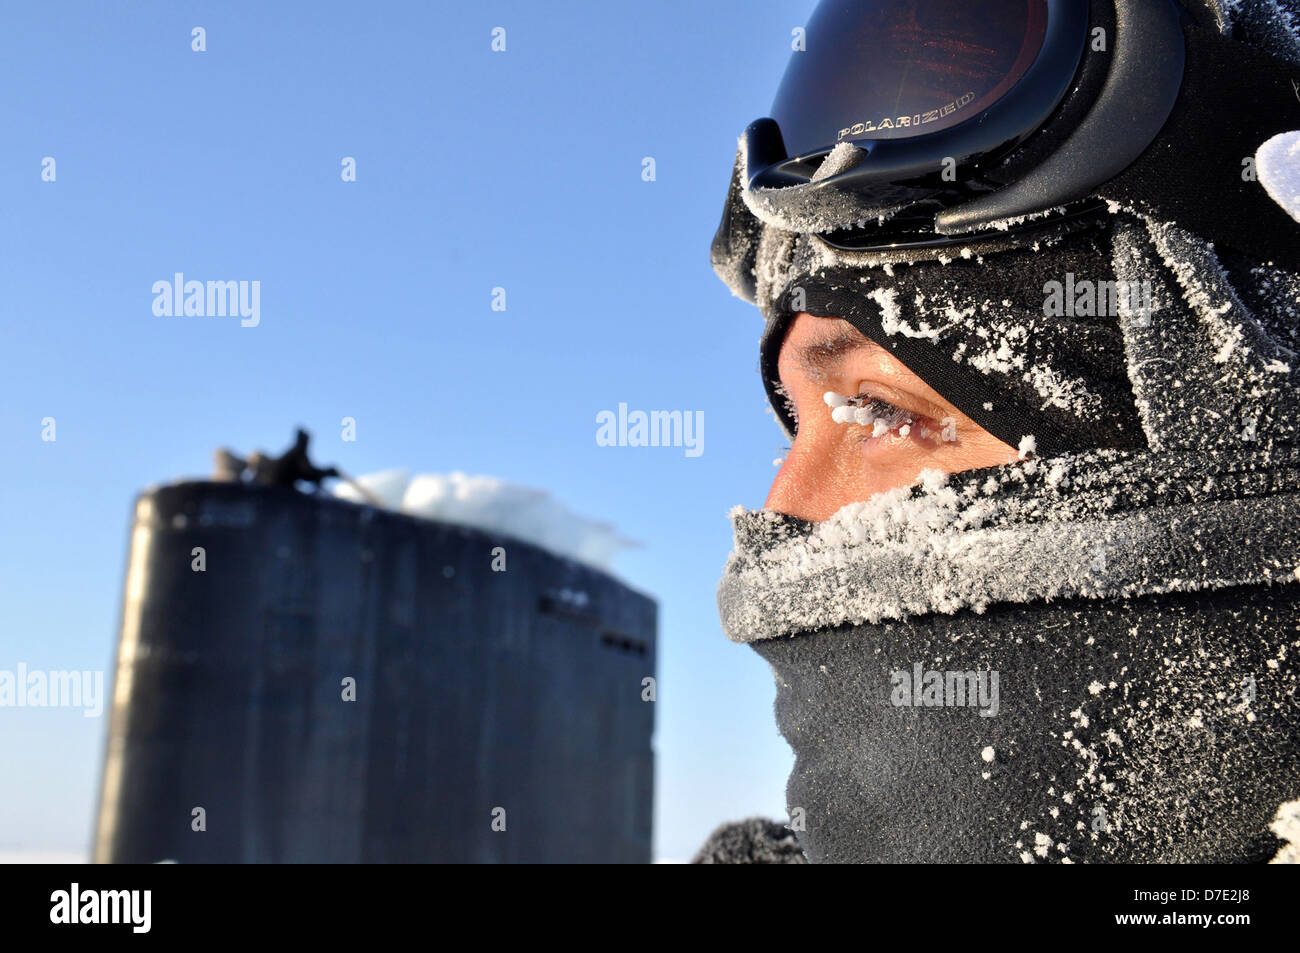 A US Navy sailor aboard the Los Angeles-class nuclear attack submarine USS Annapolis keeps watch from the bridge after breaking through three feet of ice while participating Ice Exercise March 21, 2009 in the Arctic Ocean. Two Los Angeles-class submarines, USS Helena and USS Annapolis are participating in the exercise with researchers from the University of Washington Applied Physics Laboratory and personnel from the Navy Arctic Submarine Laboratory. Stock Photo